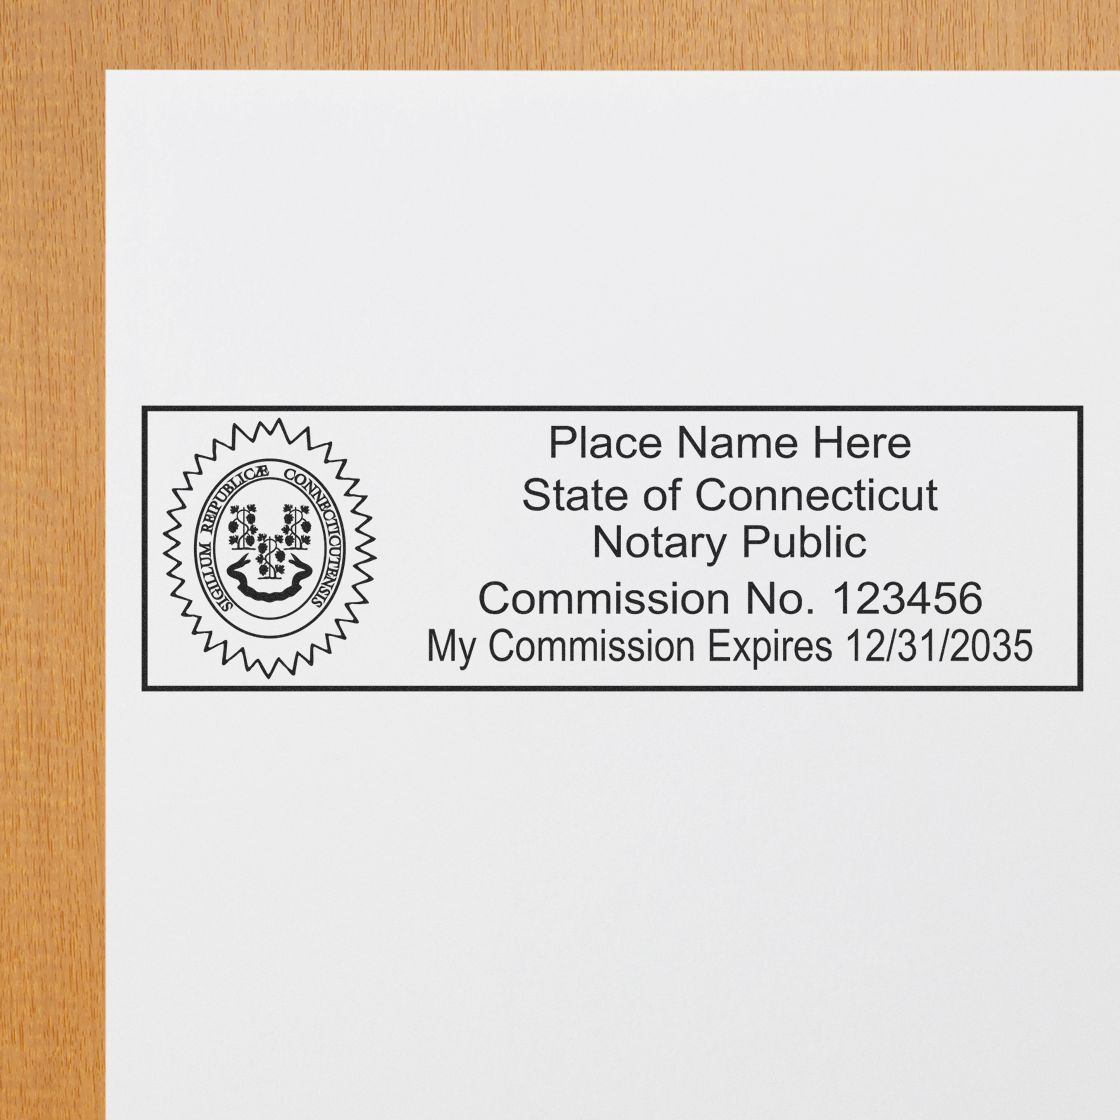 A stamped impression of the Slim Pre-Inked State Seal Notary Stamp for Connecticut in this stylish lifestyle photo, setting the tone for a unique and personalized product.